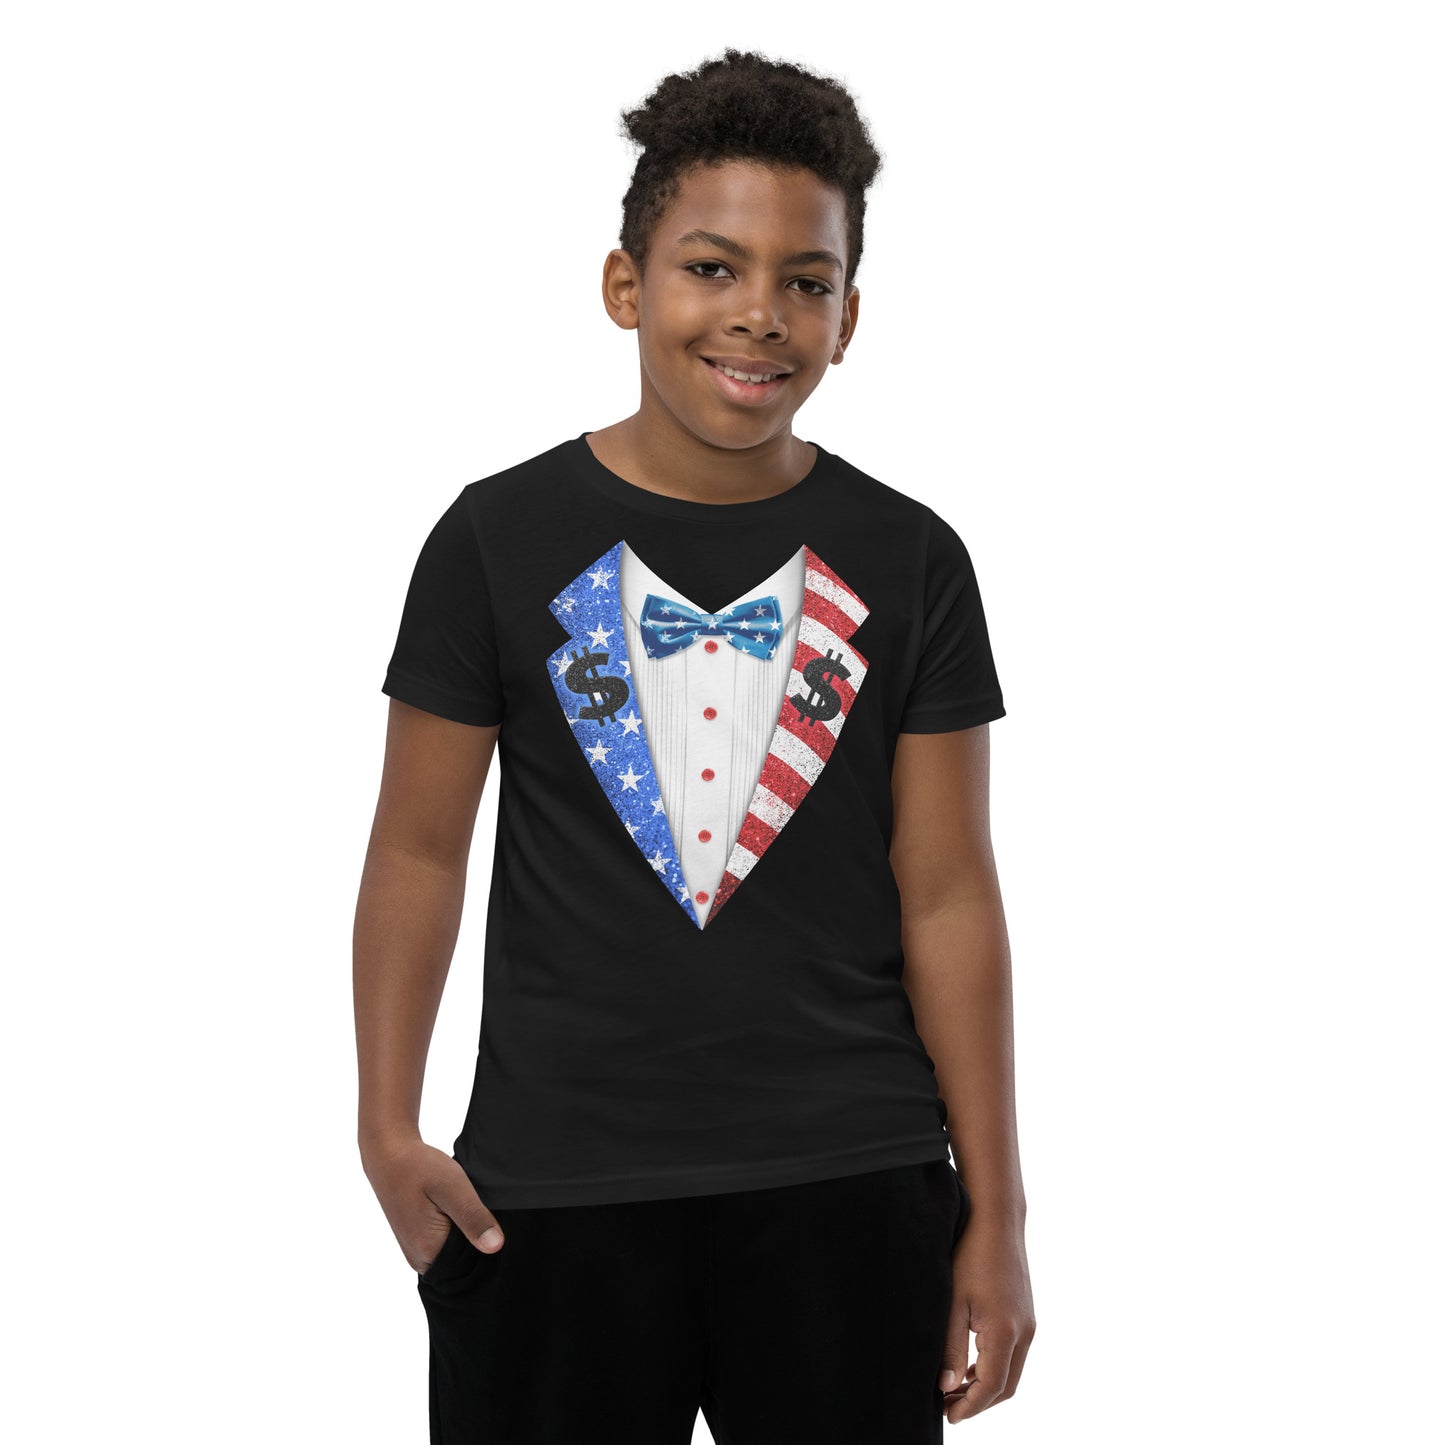 Ted DiBiase - Red, White, & Blue Youth Suit Tee